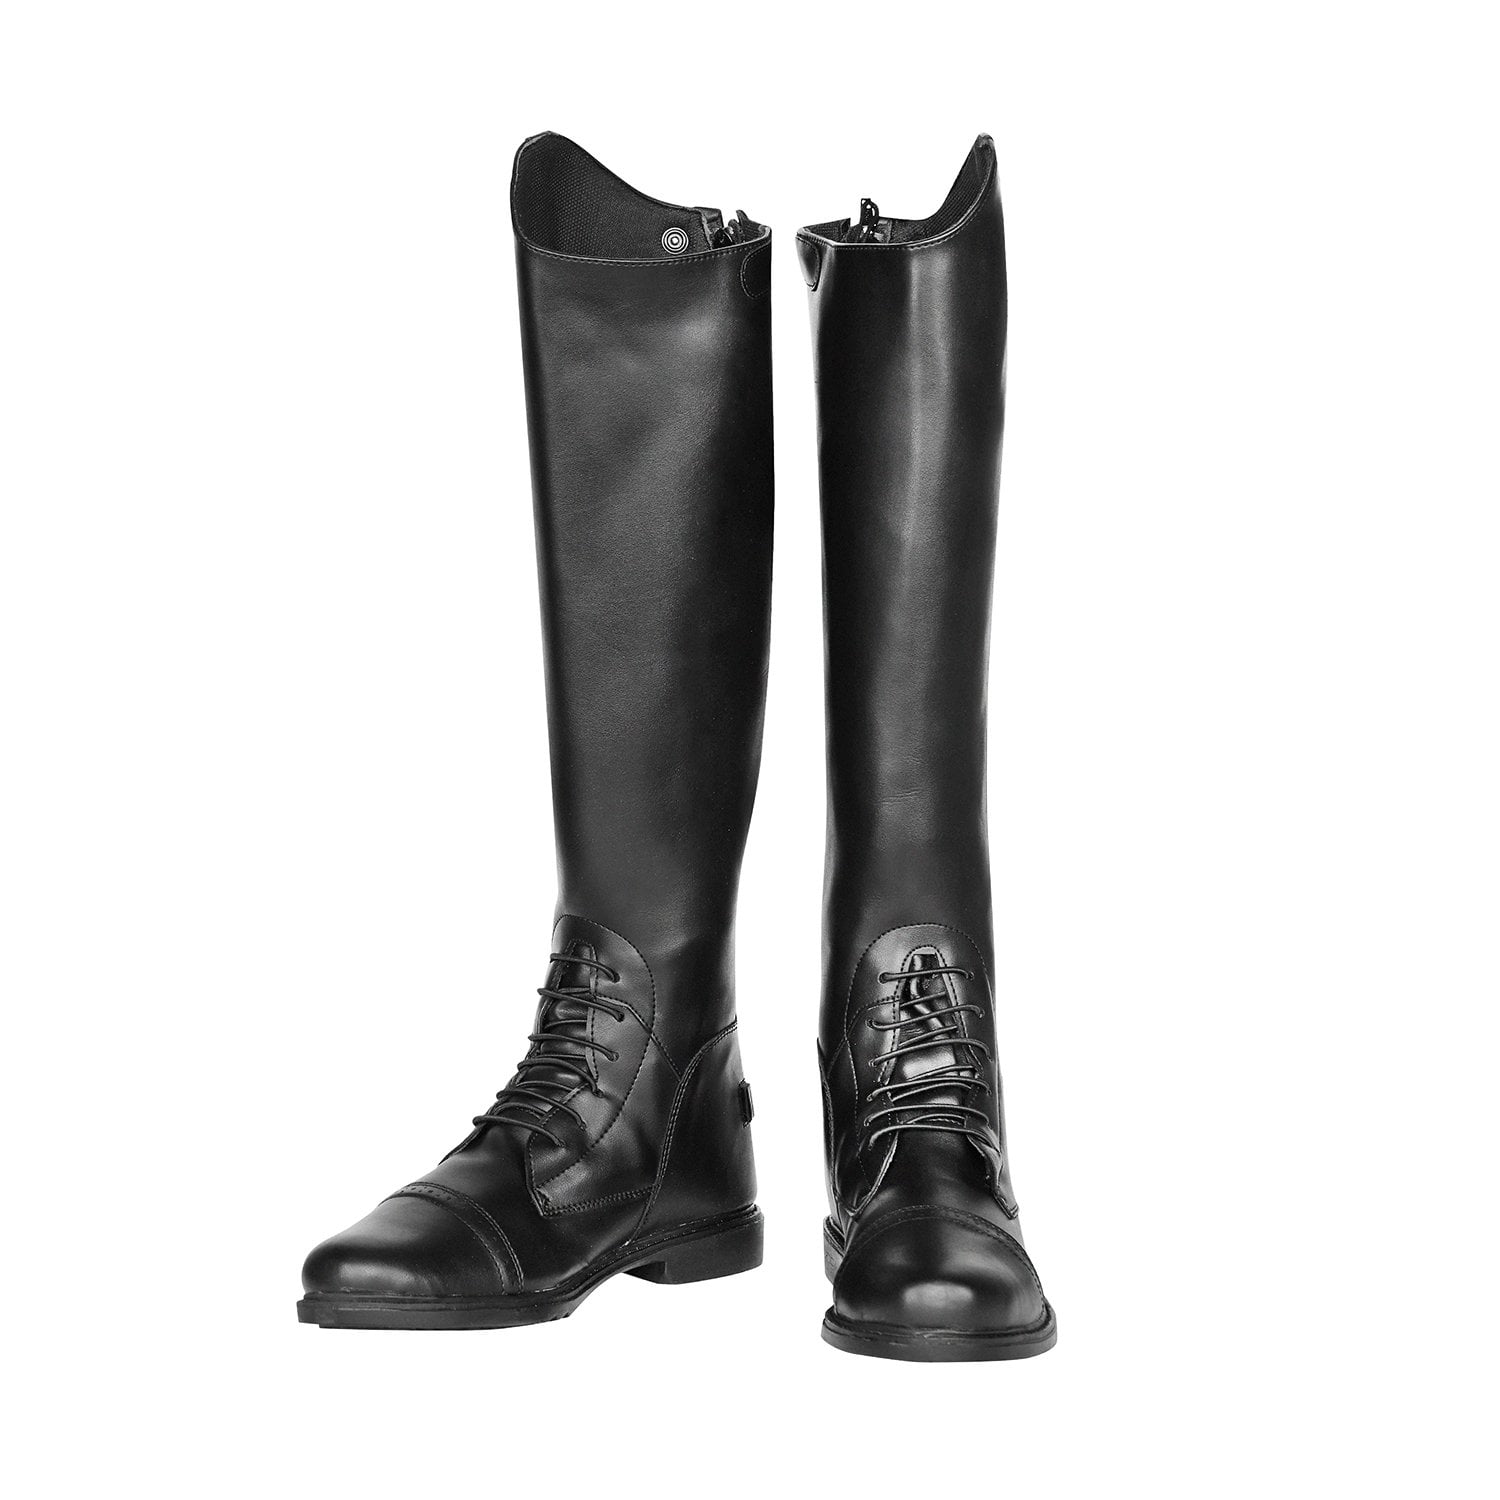 TuffRider Ladies Child Lexington Waterproof Tall Country Barn Riding Boots SALE 